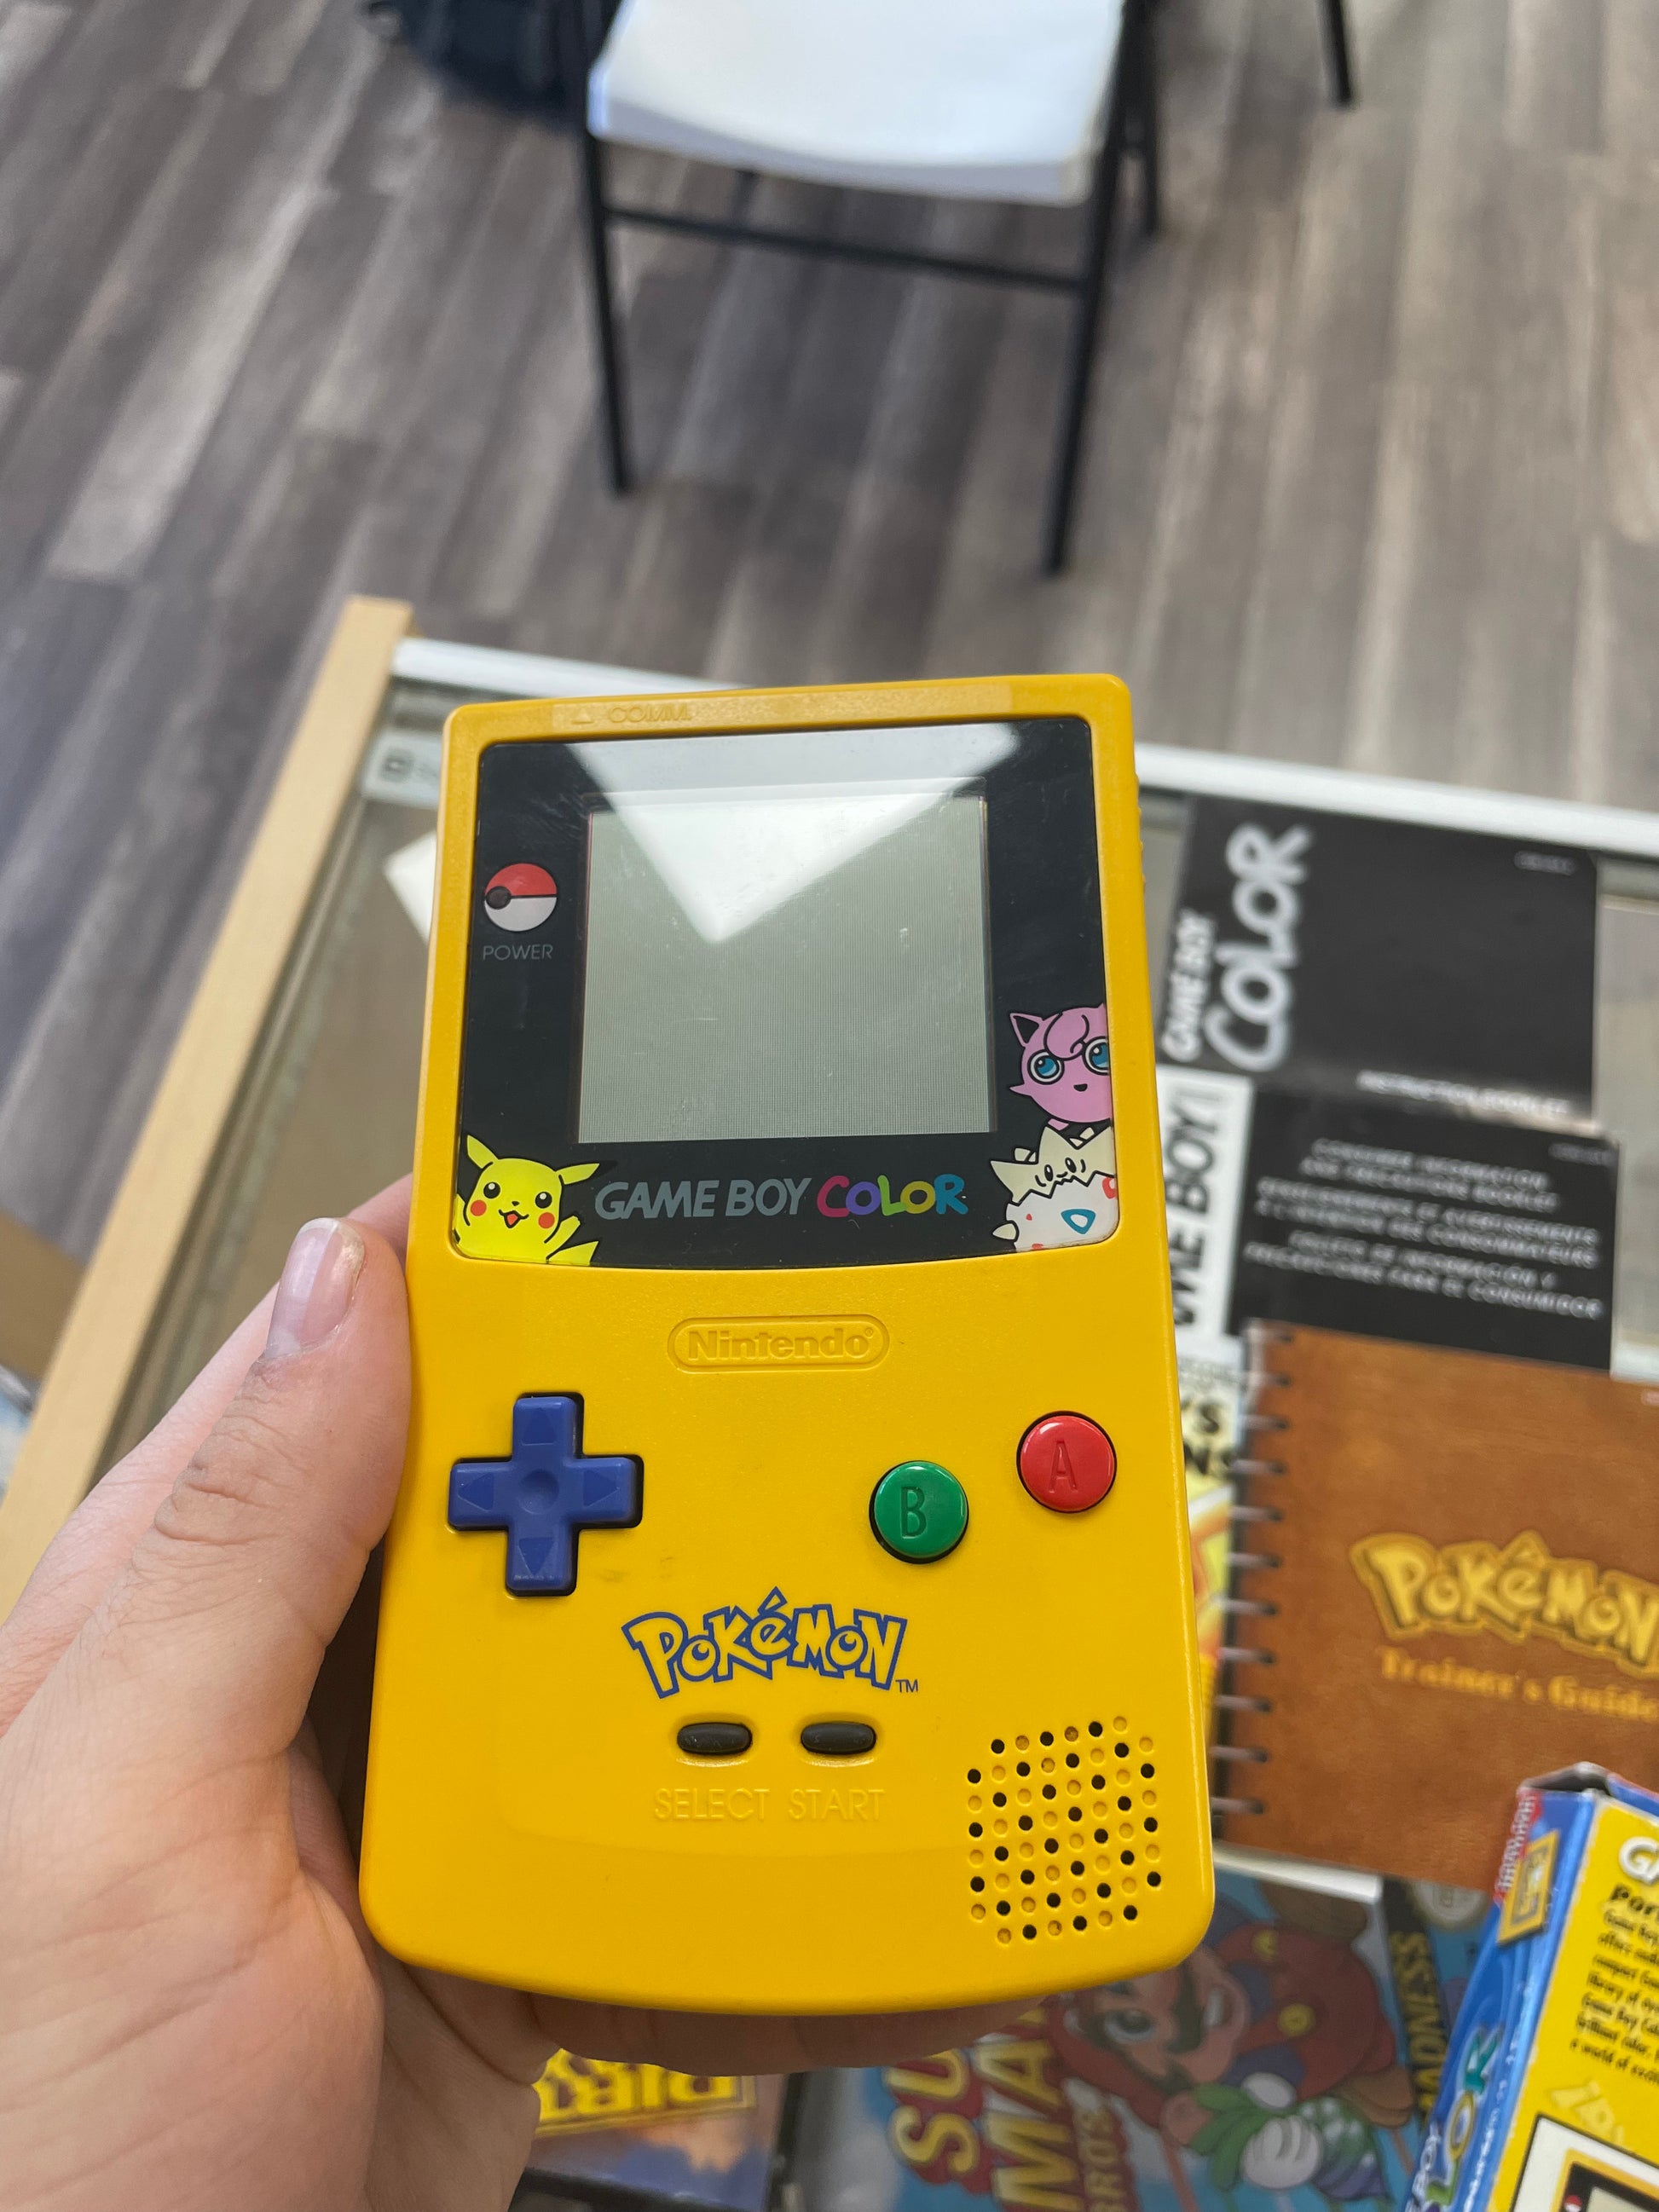  Game Boy Color - Limited Pokemon Edition - Yellow